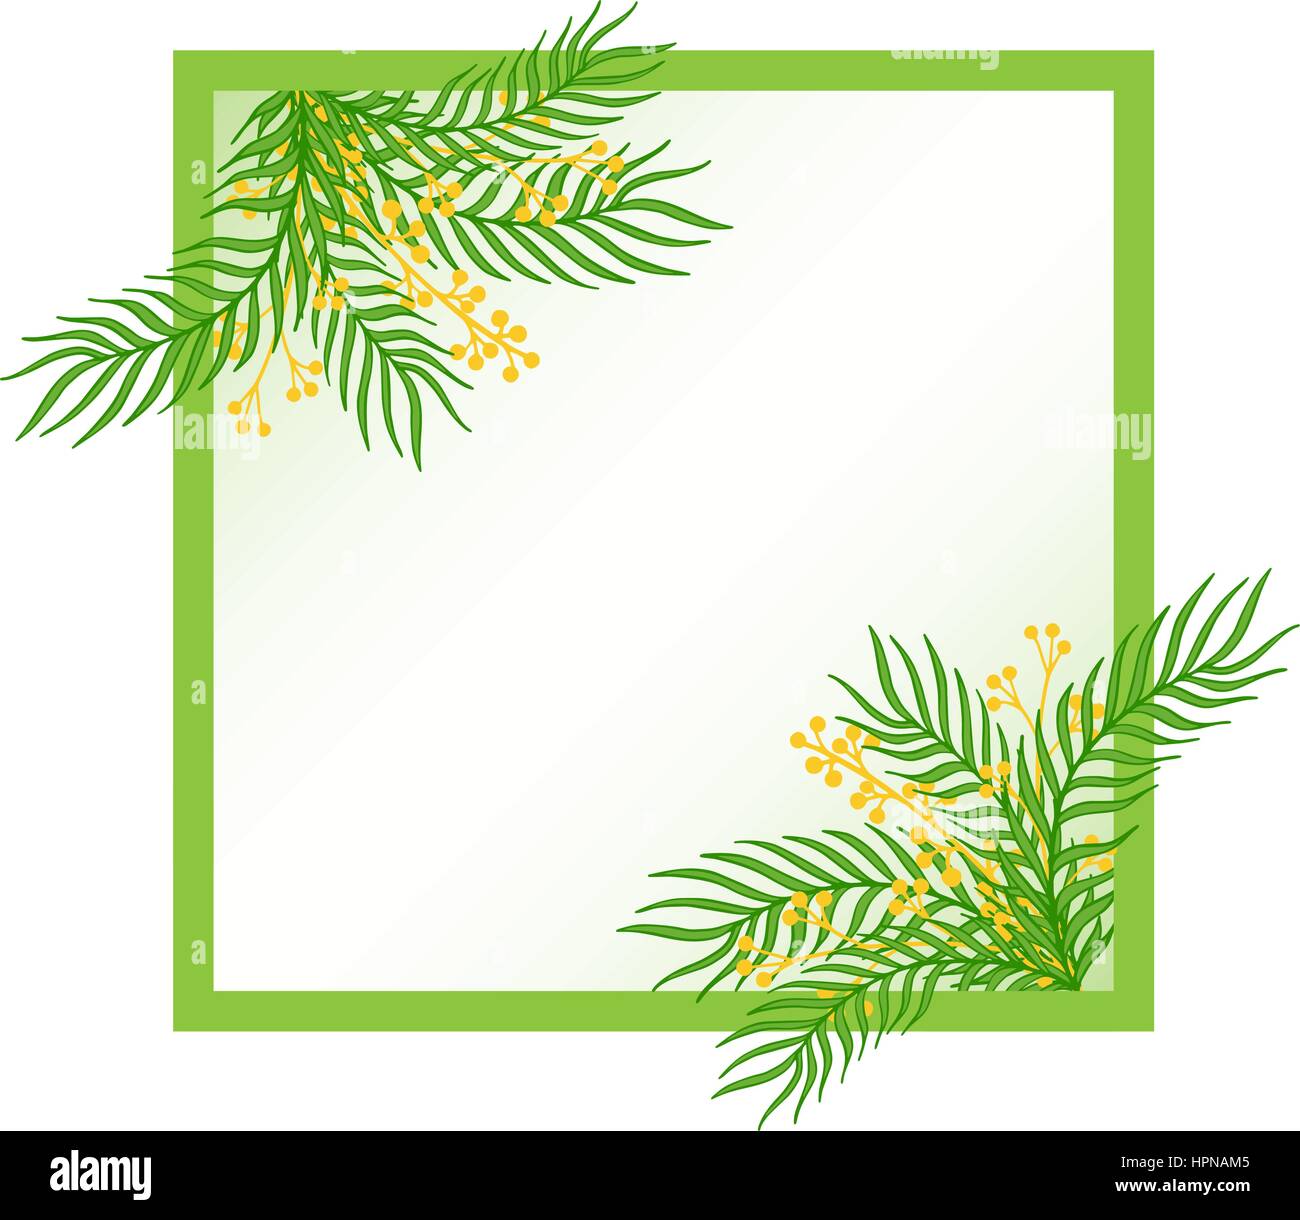 Spring frame made up of leaves Stock Vector